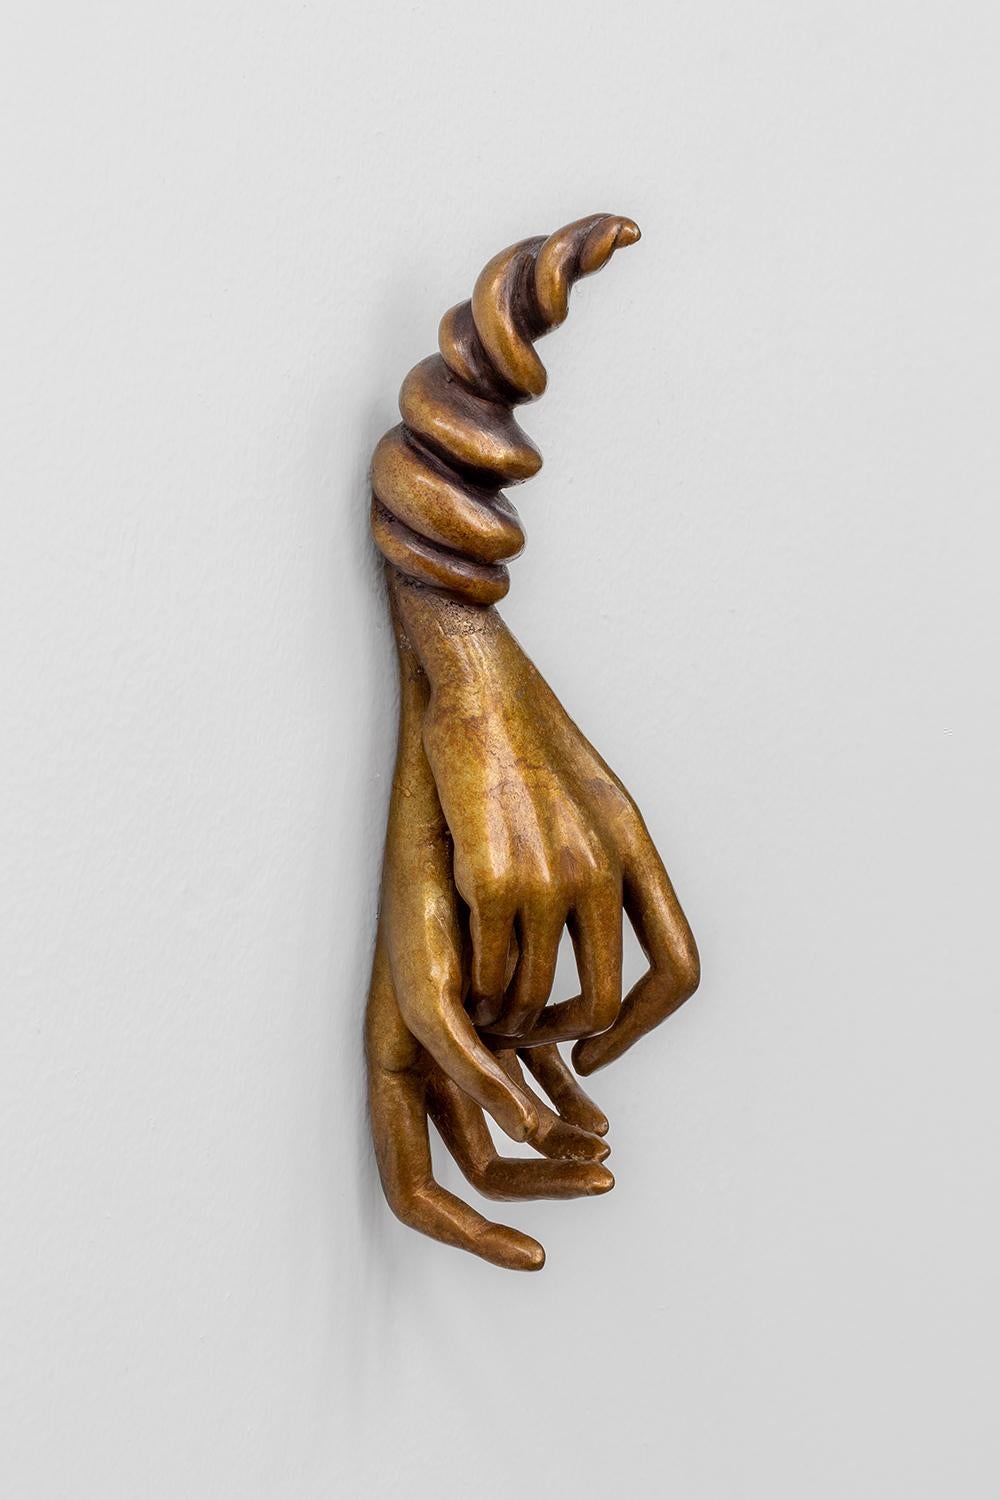 A 2023 recipient of the Vermont Governor’s Award for Excellence in the Arts,

Leslie Fry is represented in this show with fantastical sculptures of female hands, titled the “Cuffed” series.   Tensely poised and mannered gestures, inspired by